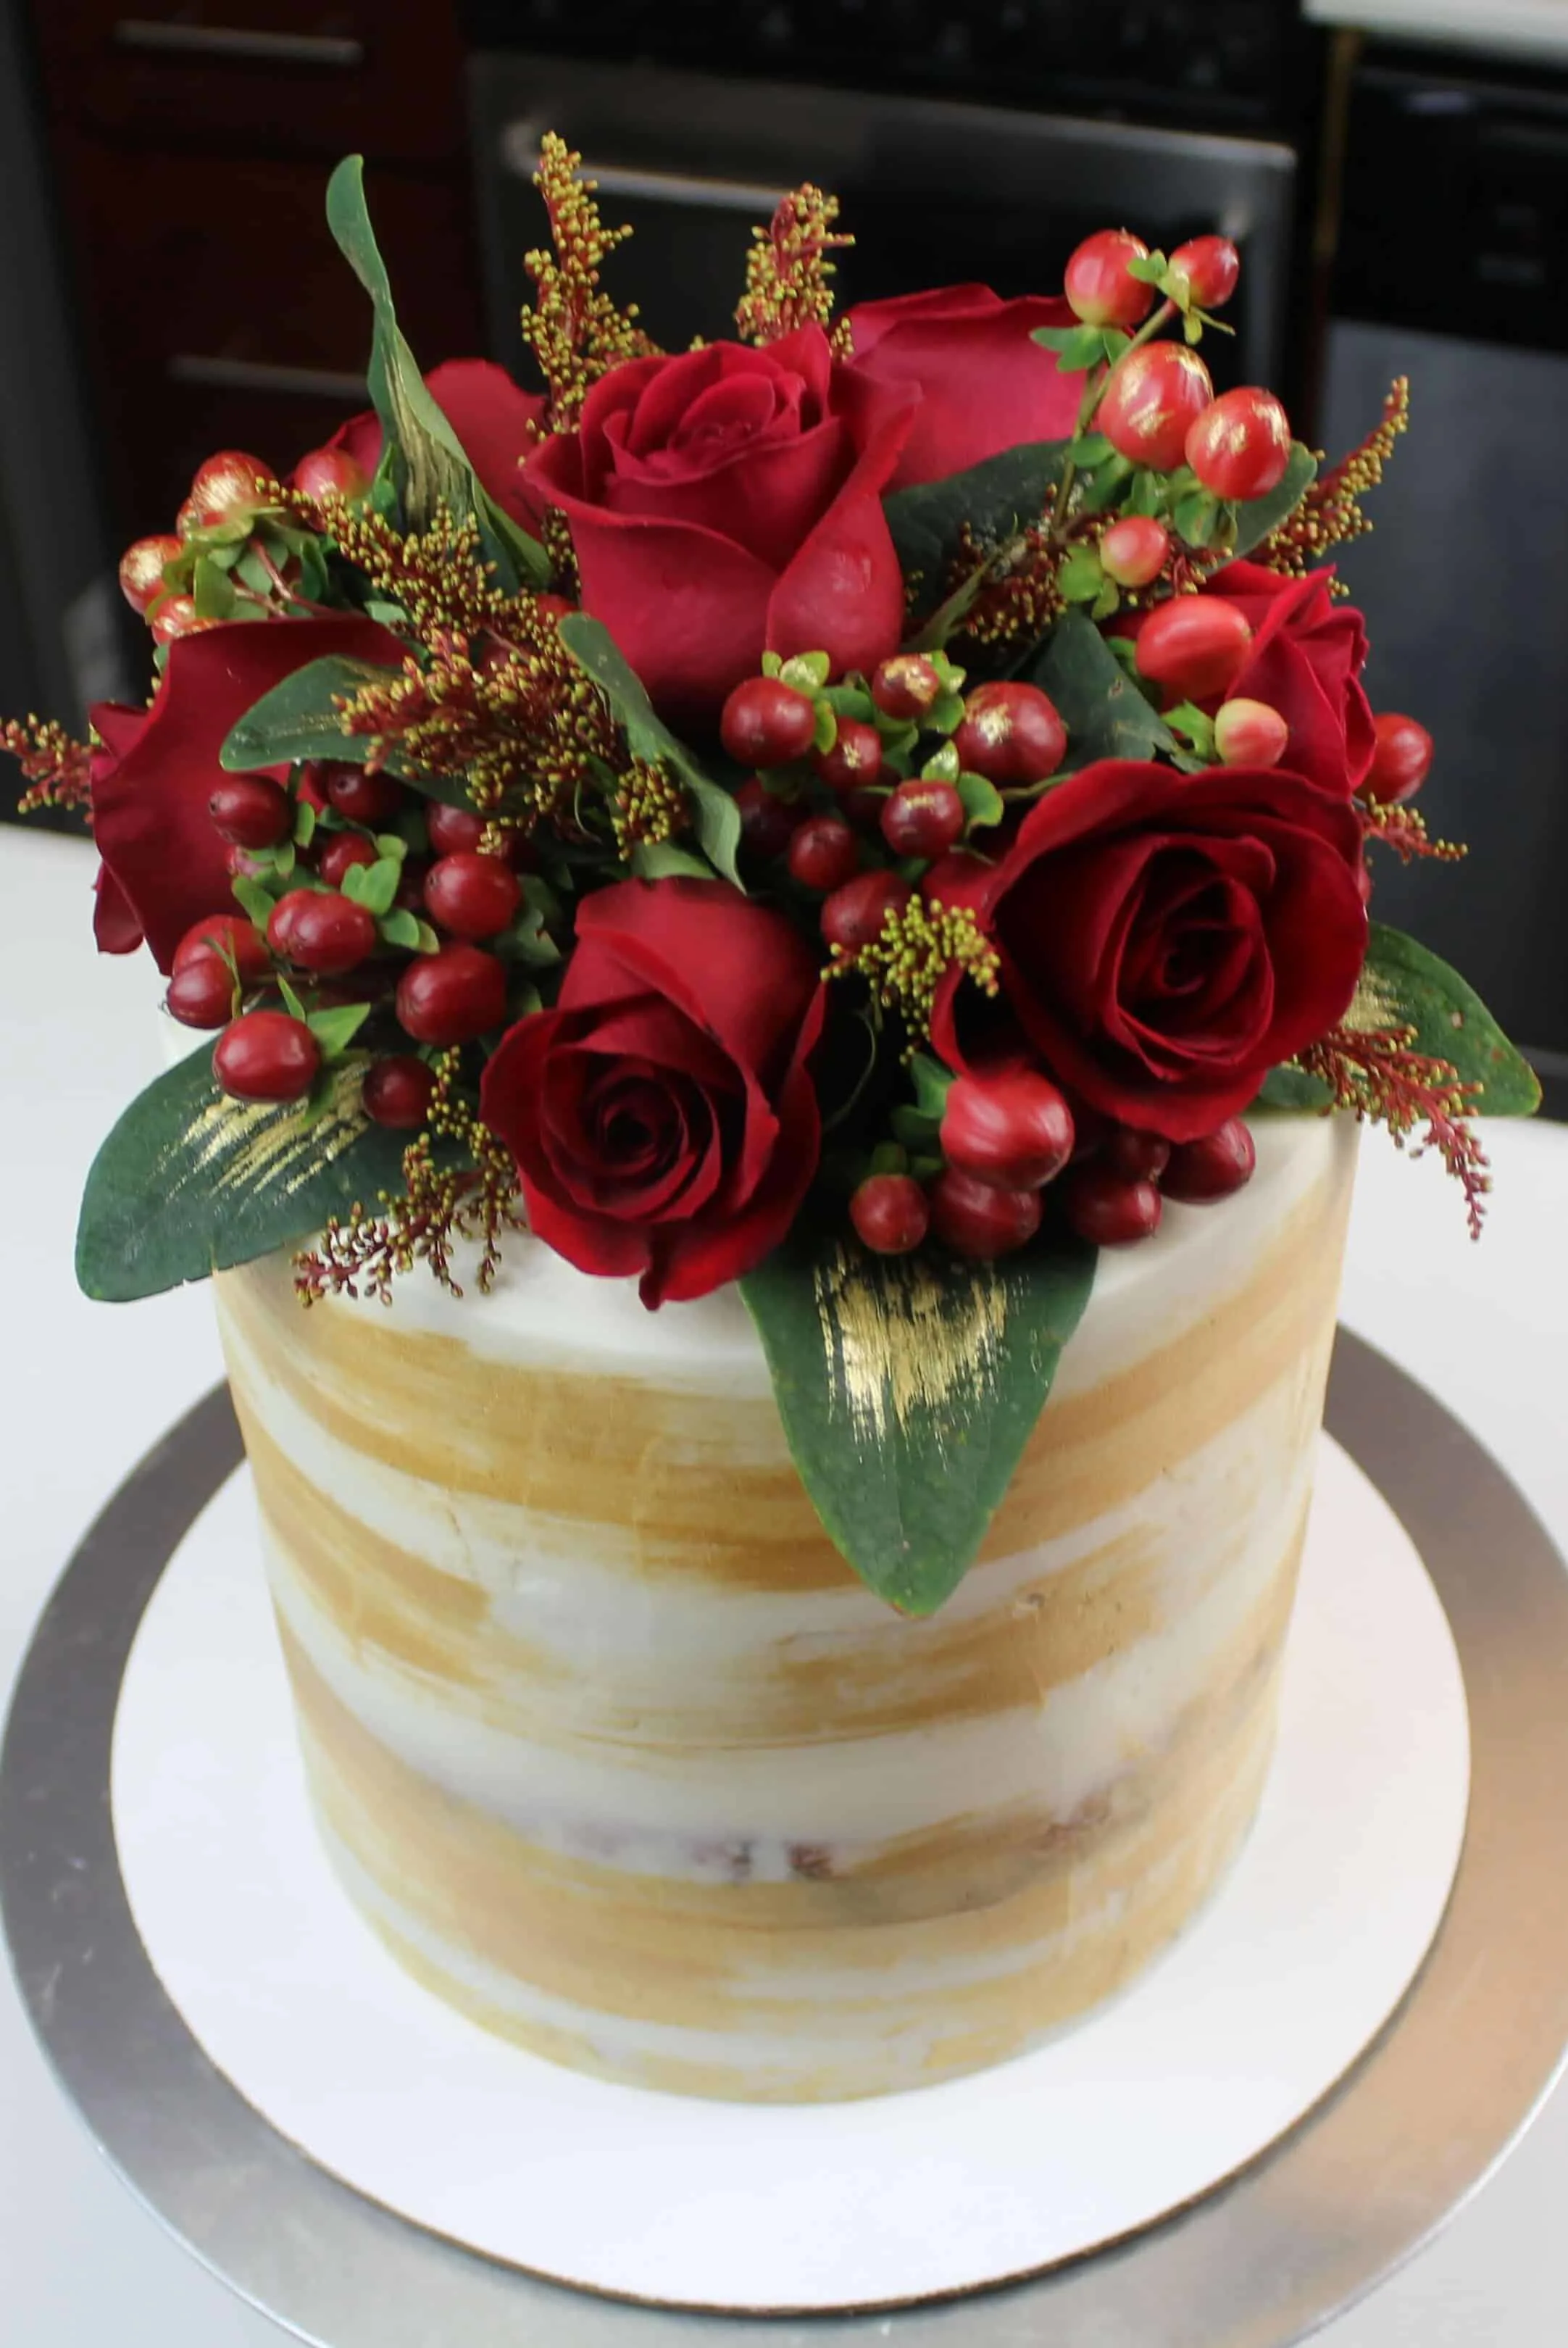 Pink Shaded Cake With Assorted Fresh Roses (Eggless) - Ovenfresh